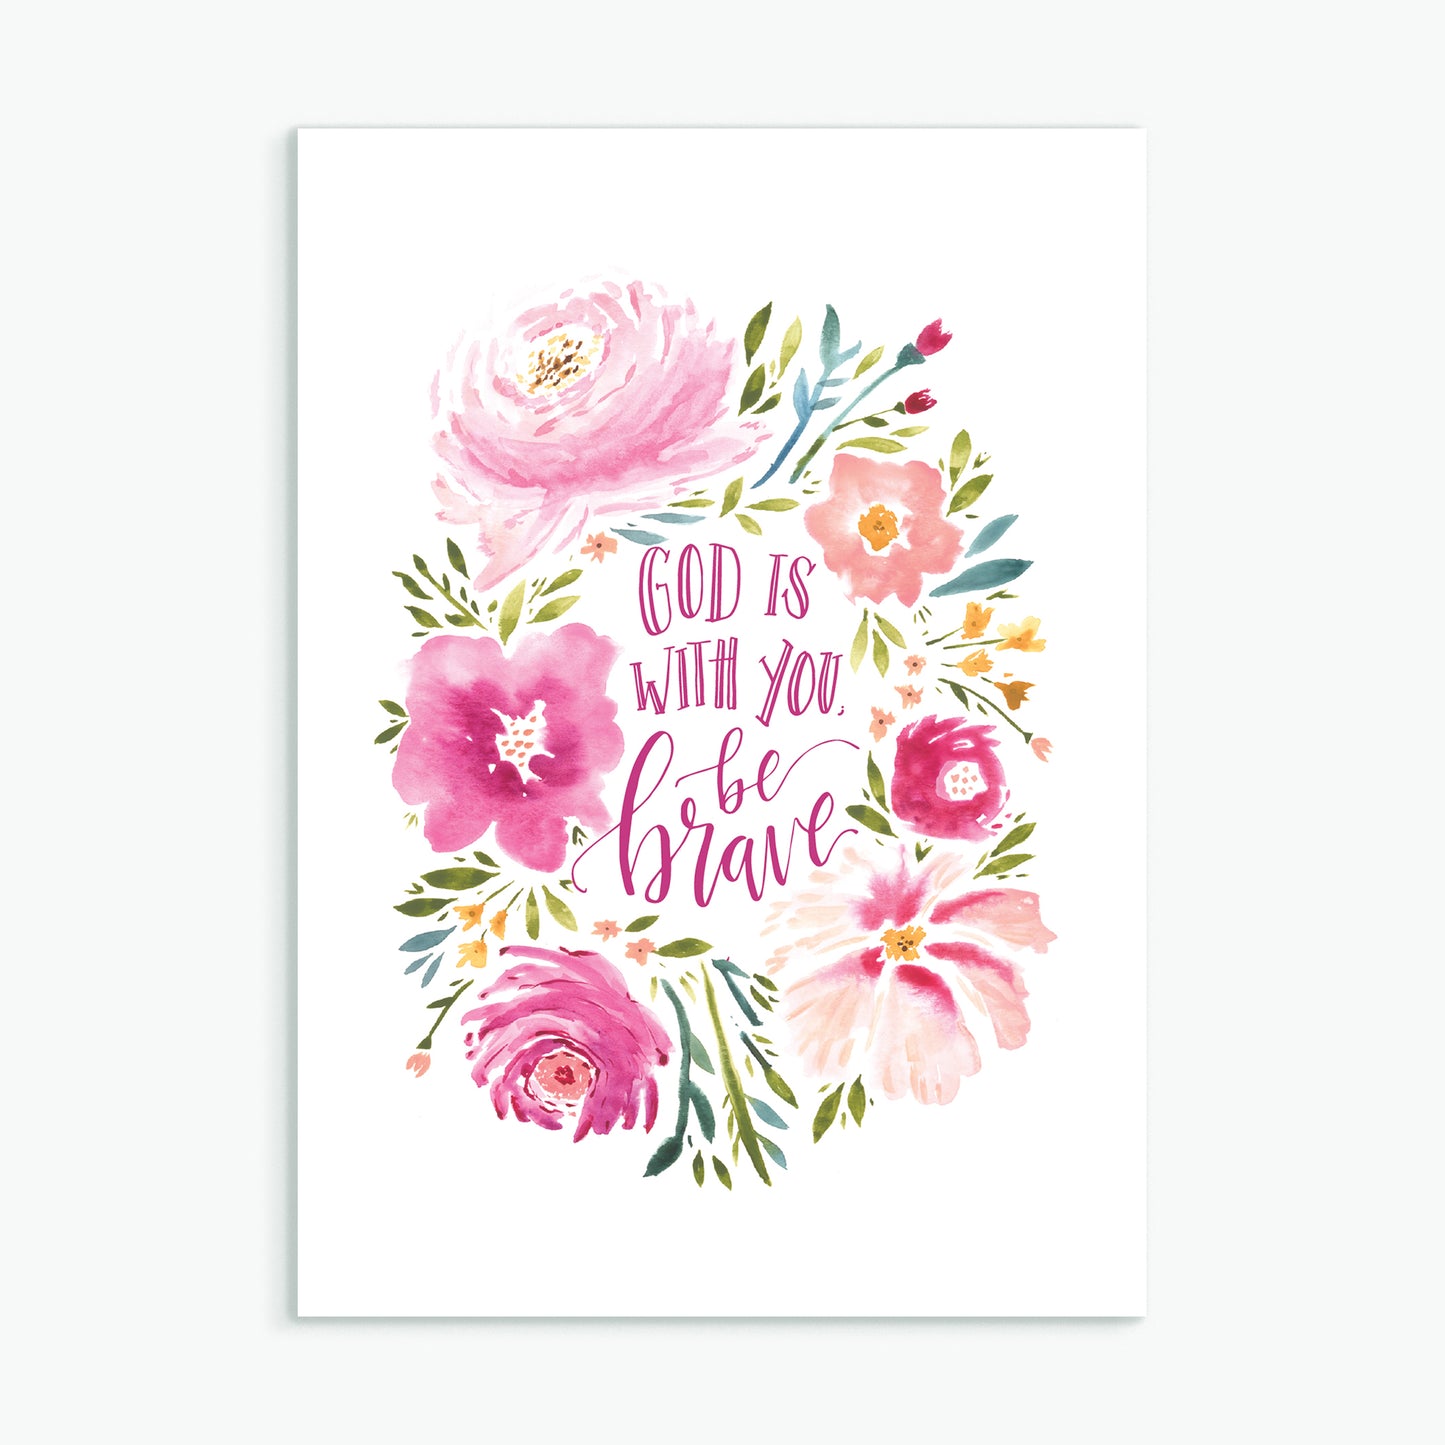 'God is With You, Be Brave' by Emily Burger - Greeting Card